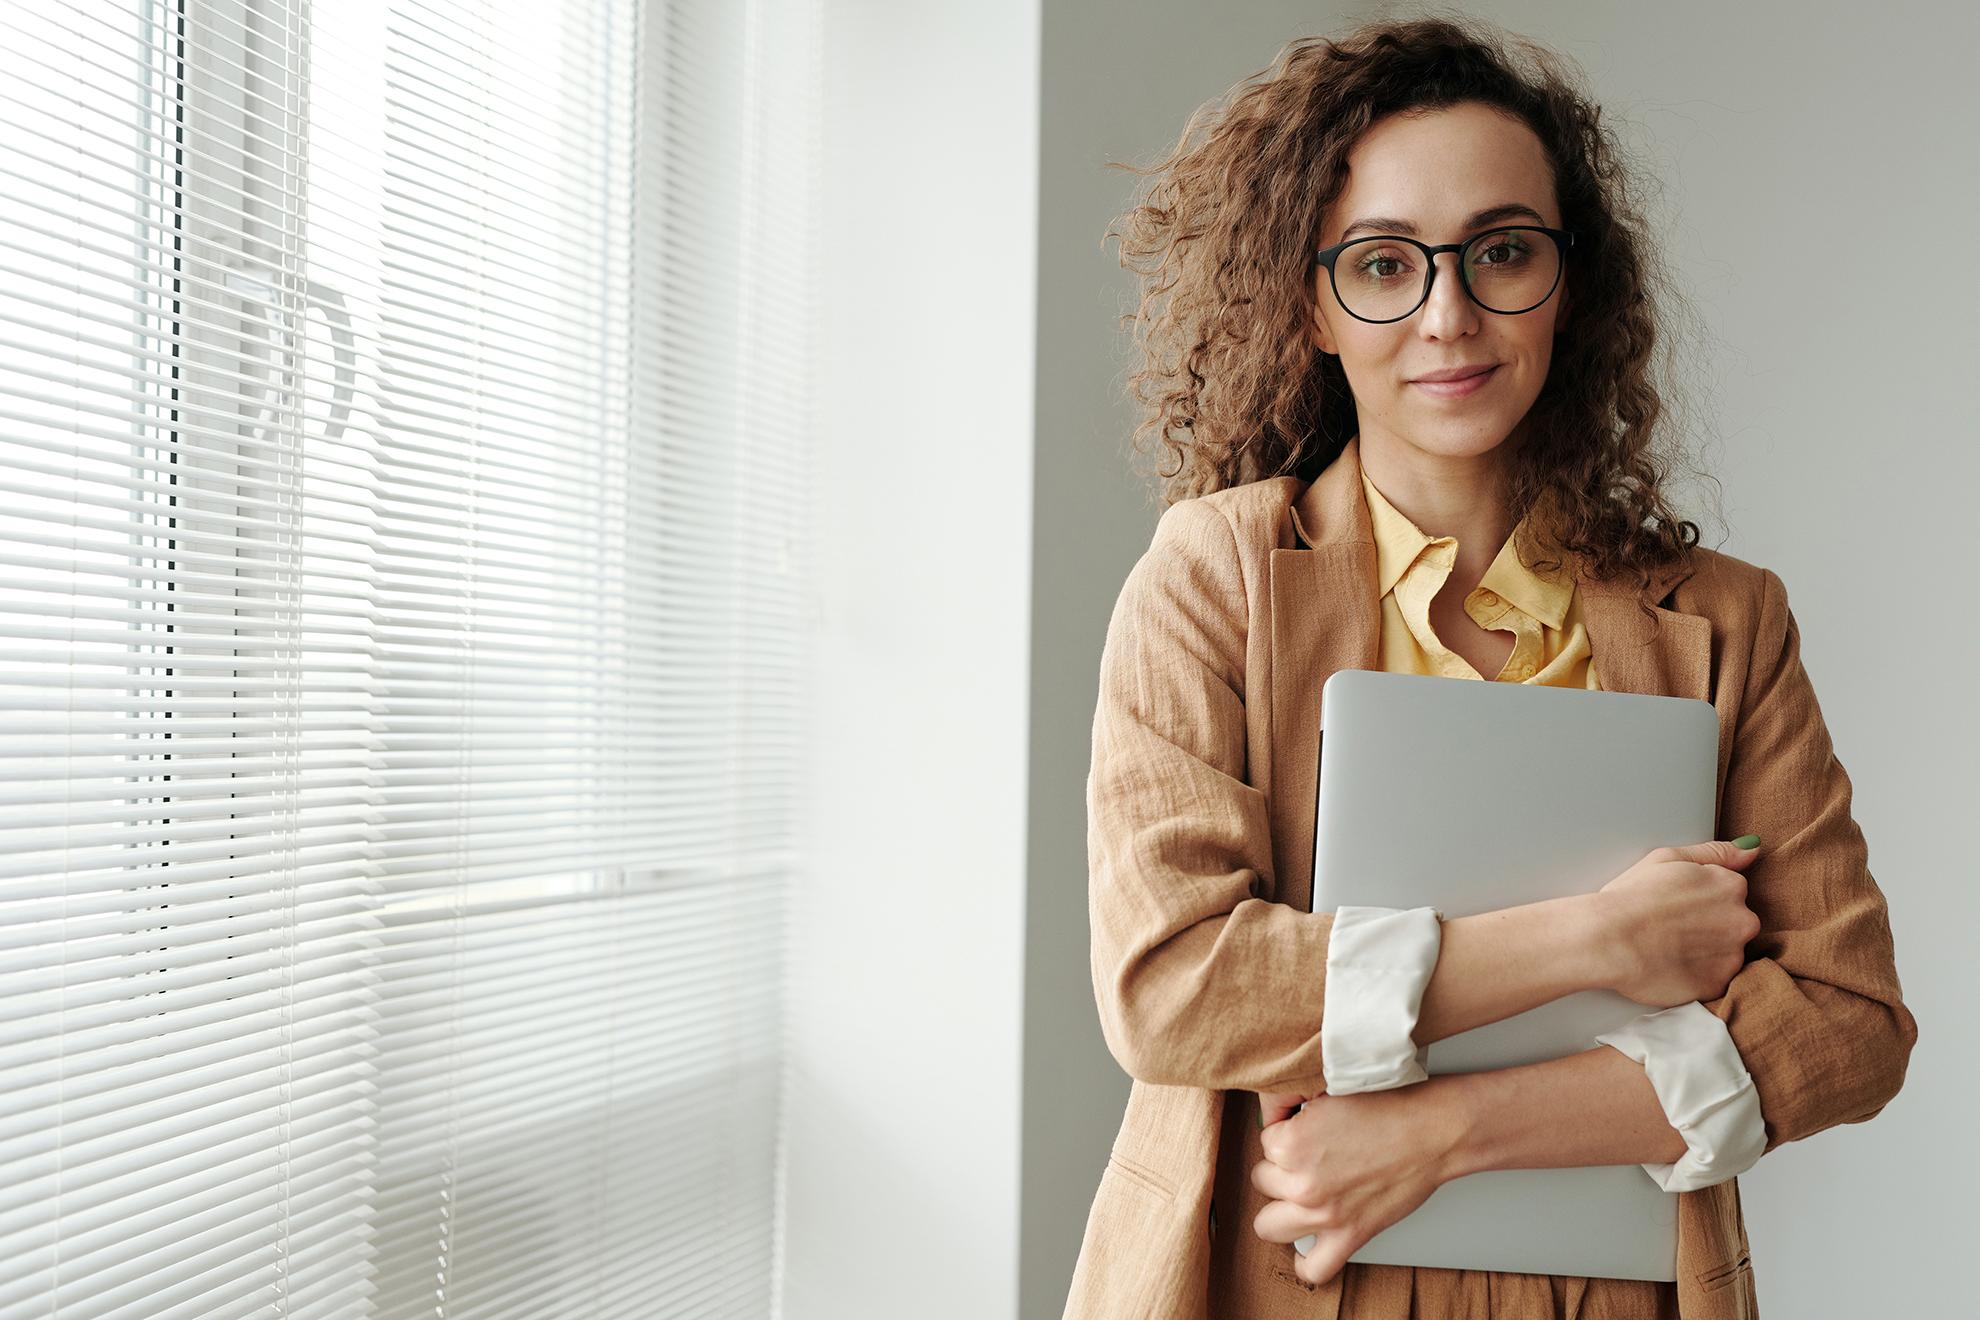 A picture of a woman with eyeglasses holding a laptop